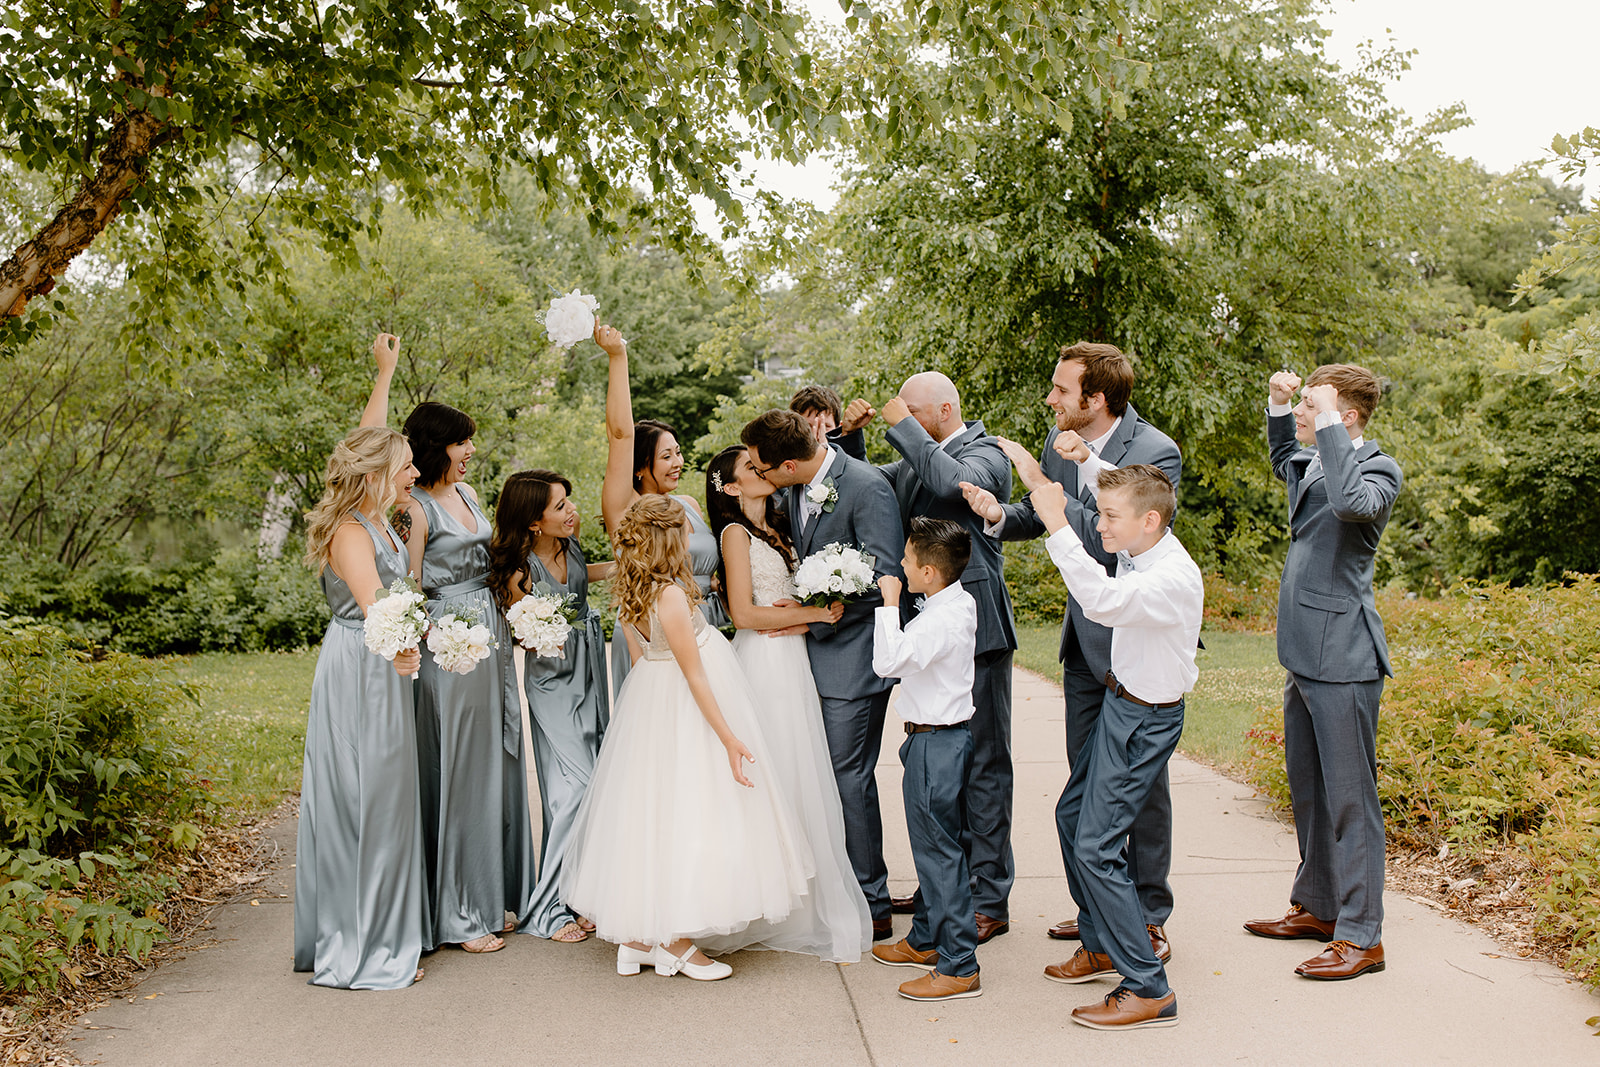 Bride and groom kiss while their wedding party cheers them on